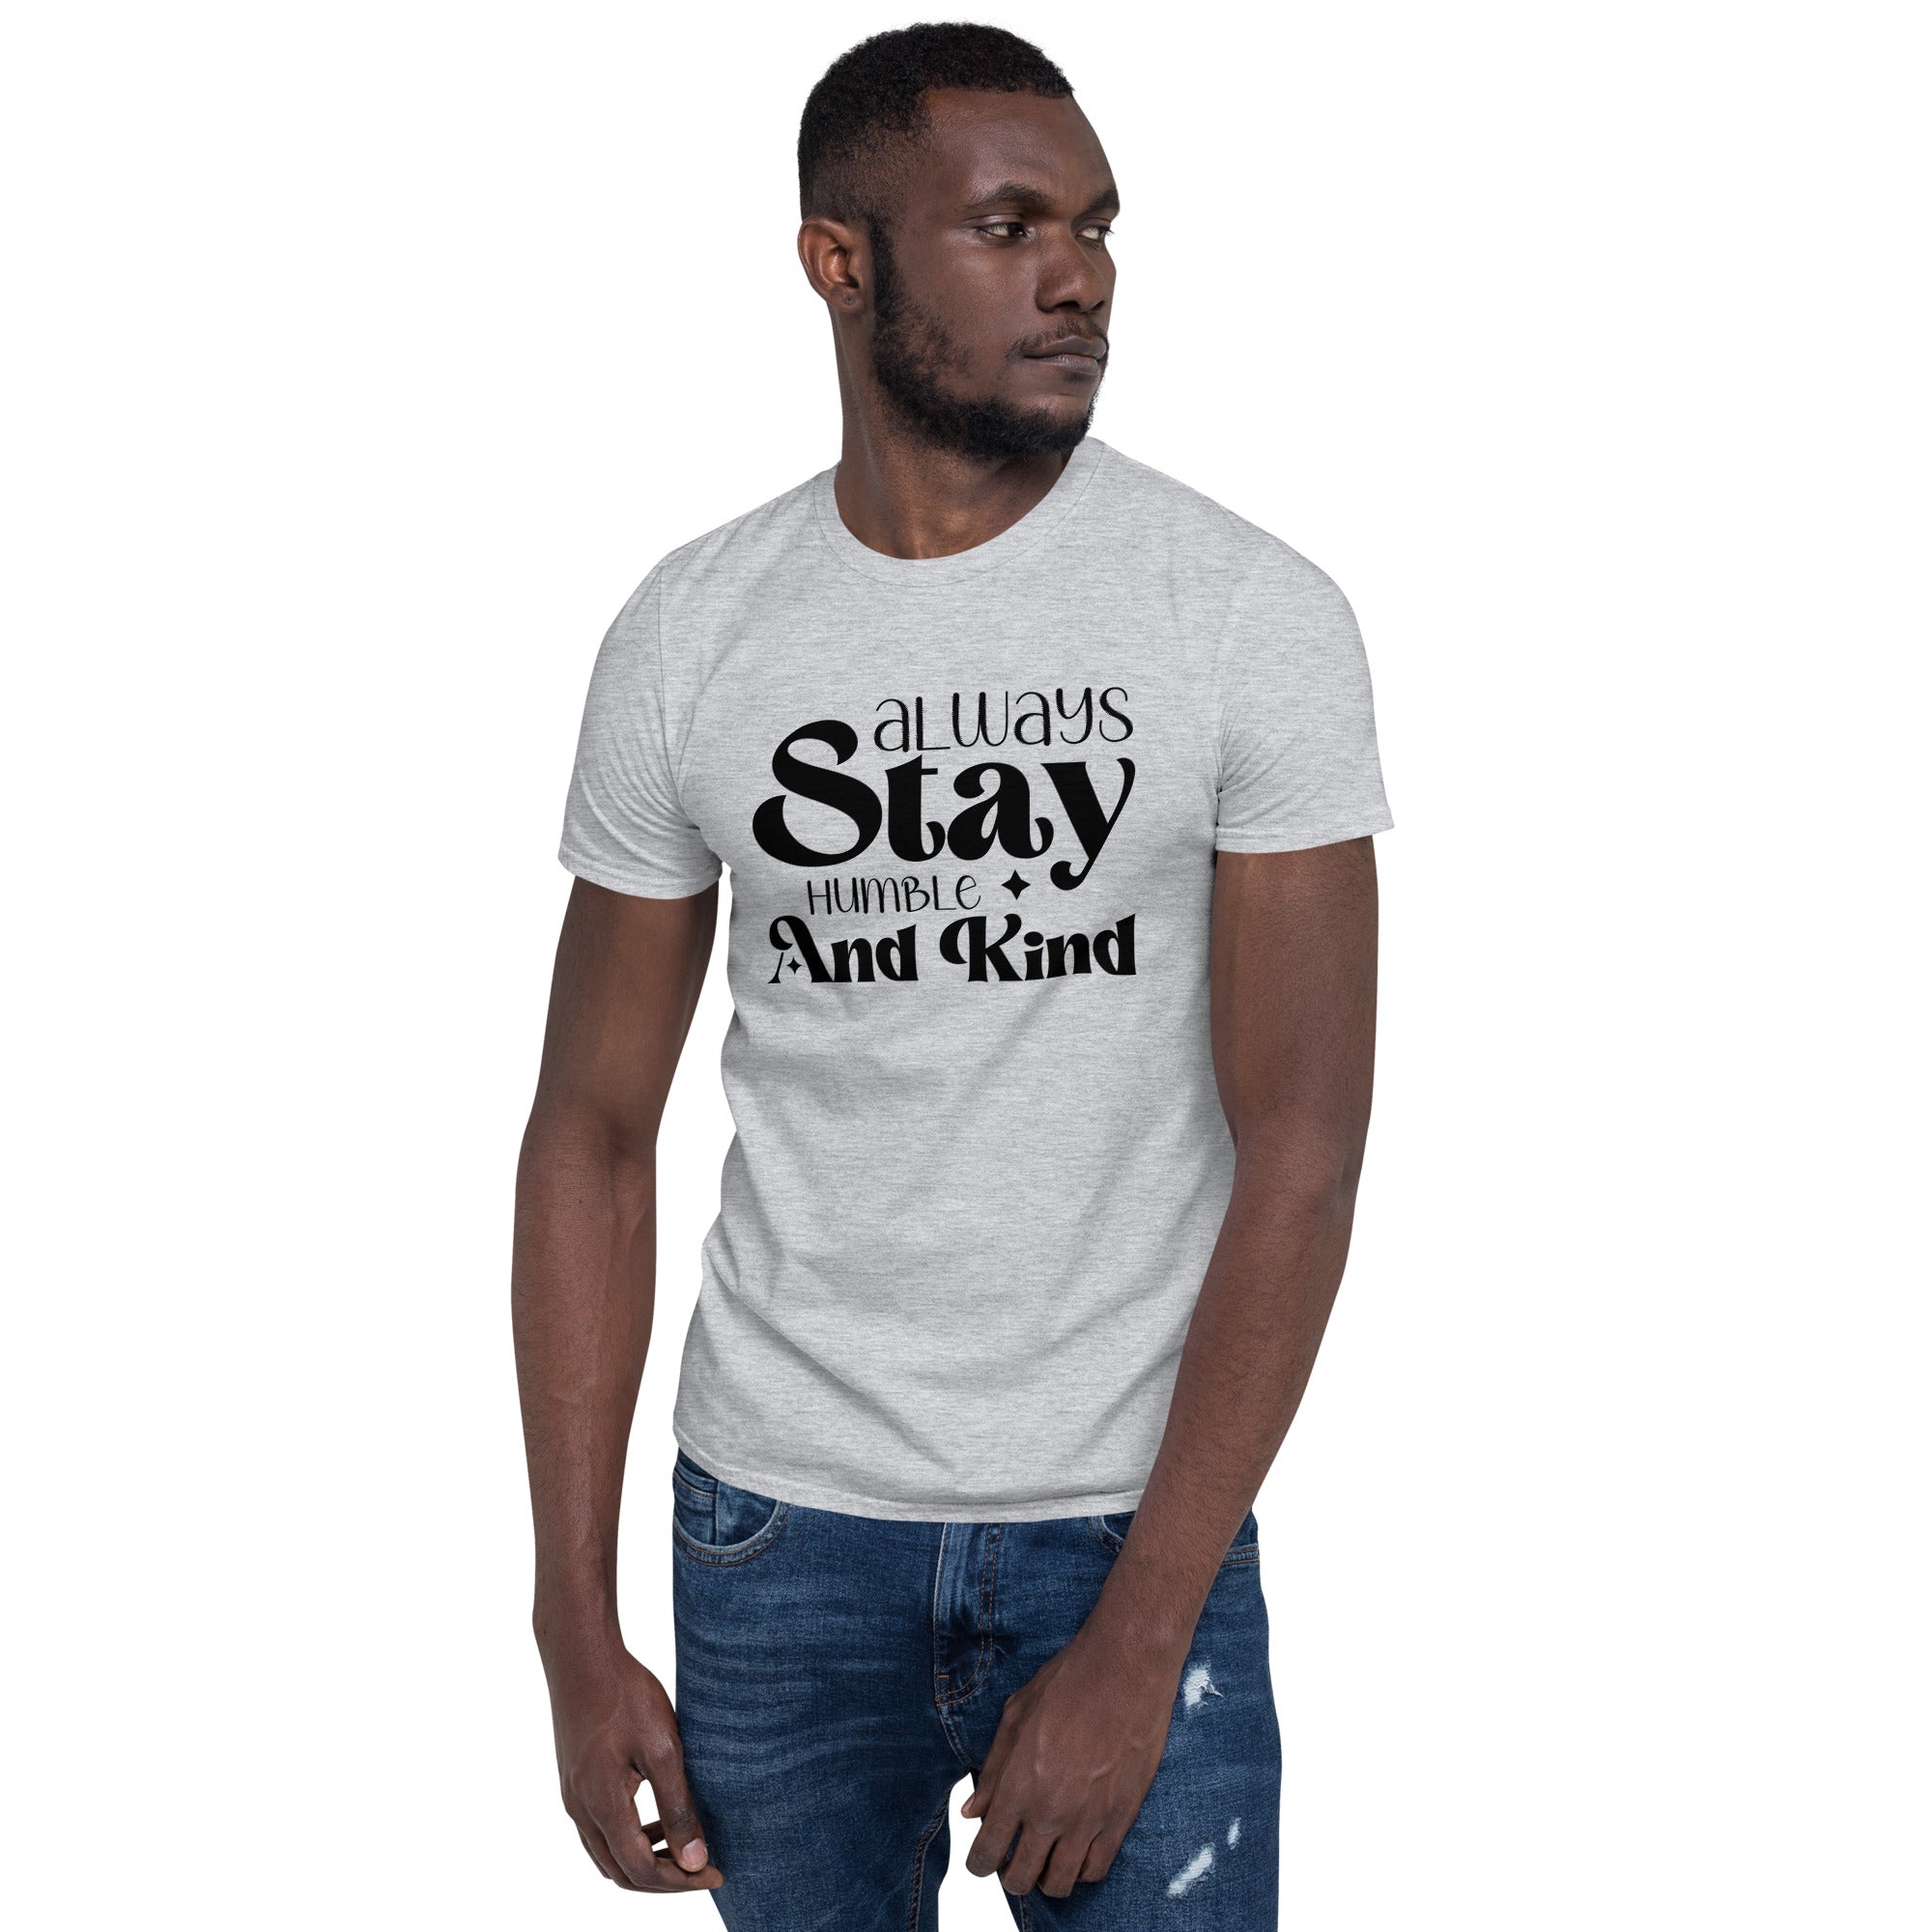 Always Stay Humble And Kind - Short-Sleeve Unisex T-Shirt